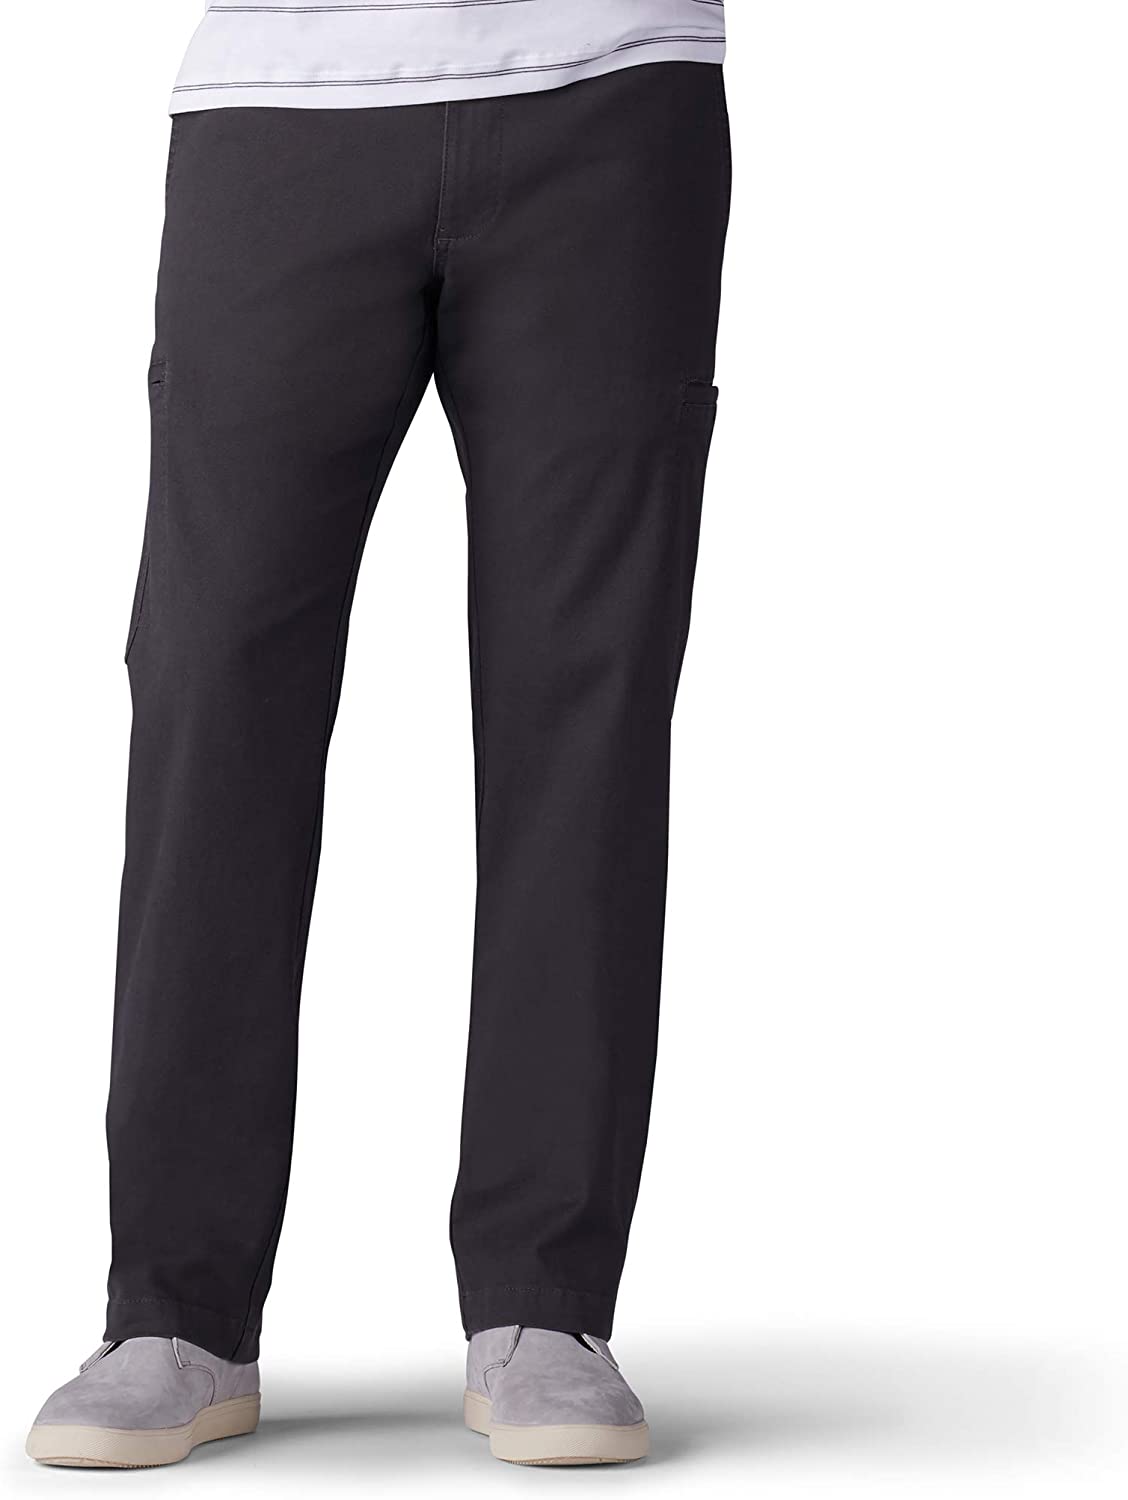 Lee Mens Big & Tall Performance Series Extreme Comfort Cargo Pant 